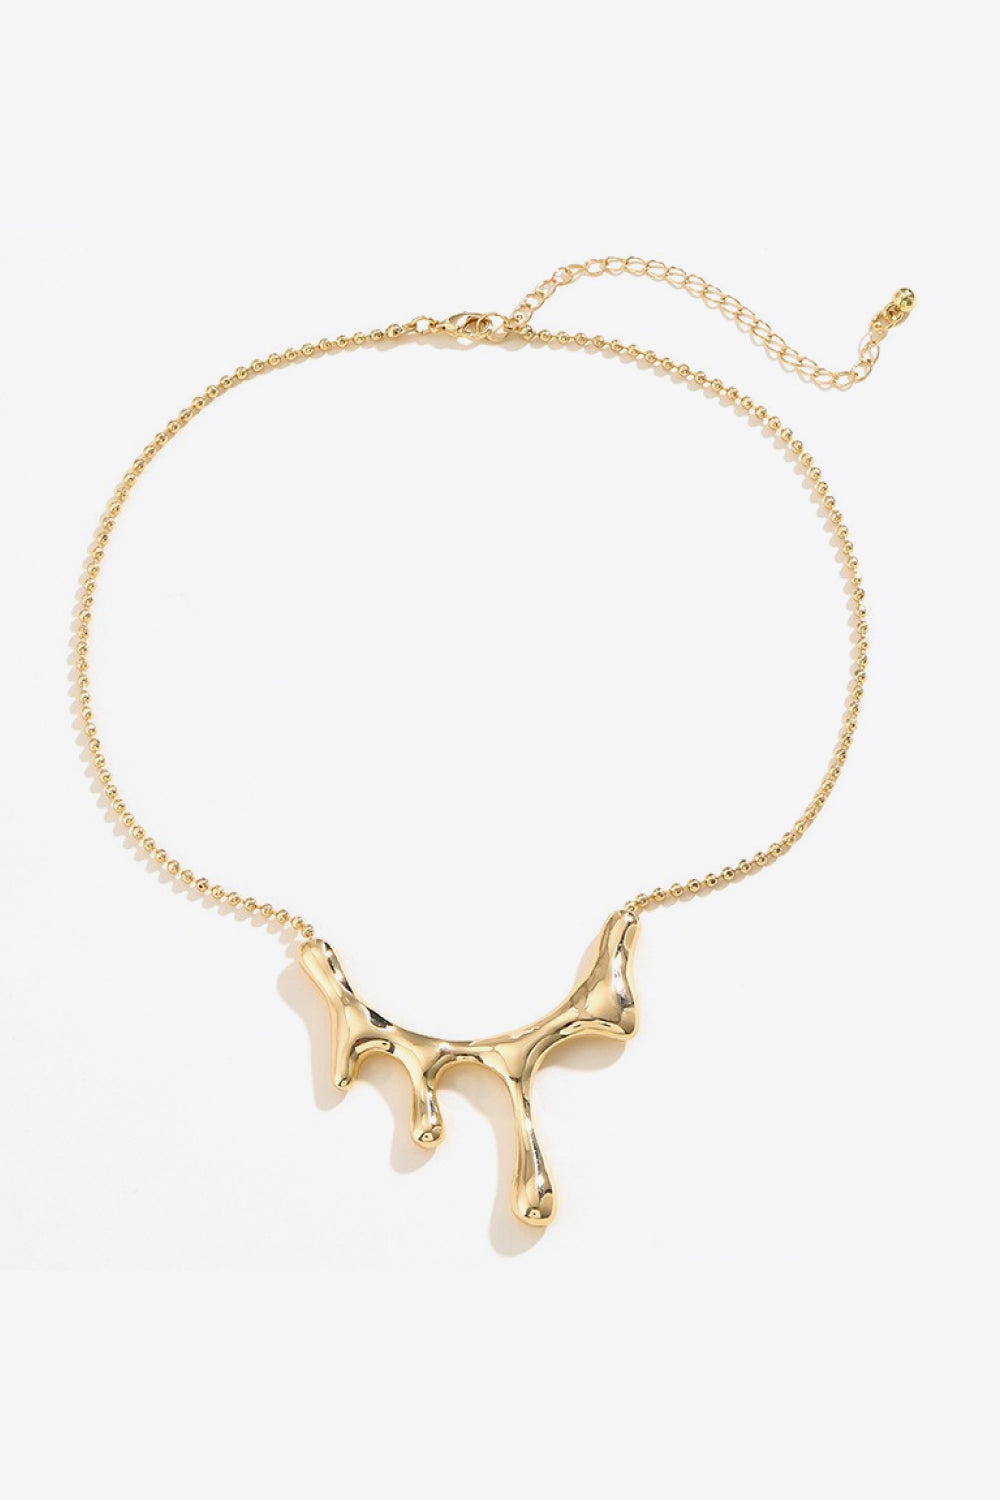 Women's Fashion Lobster Clasp Necklace